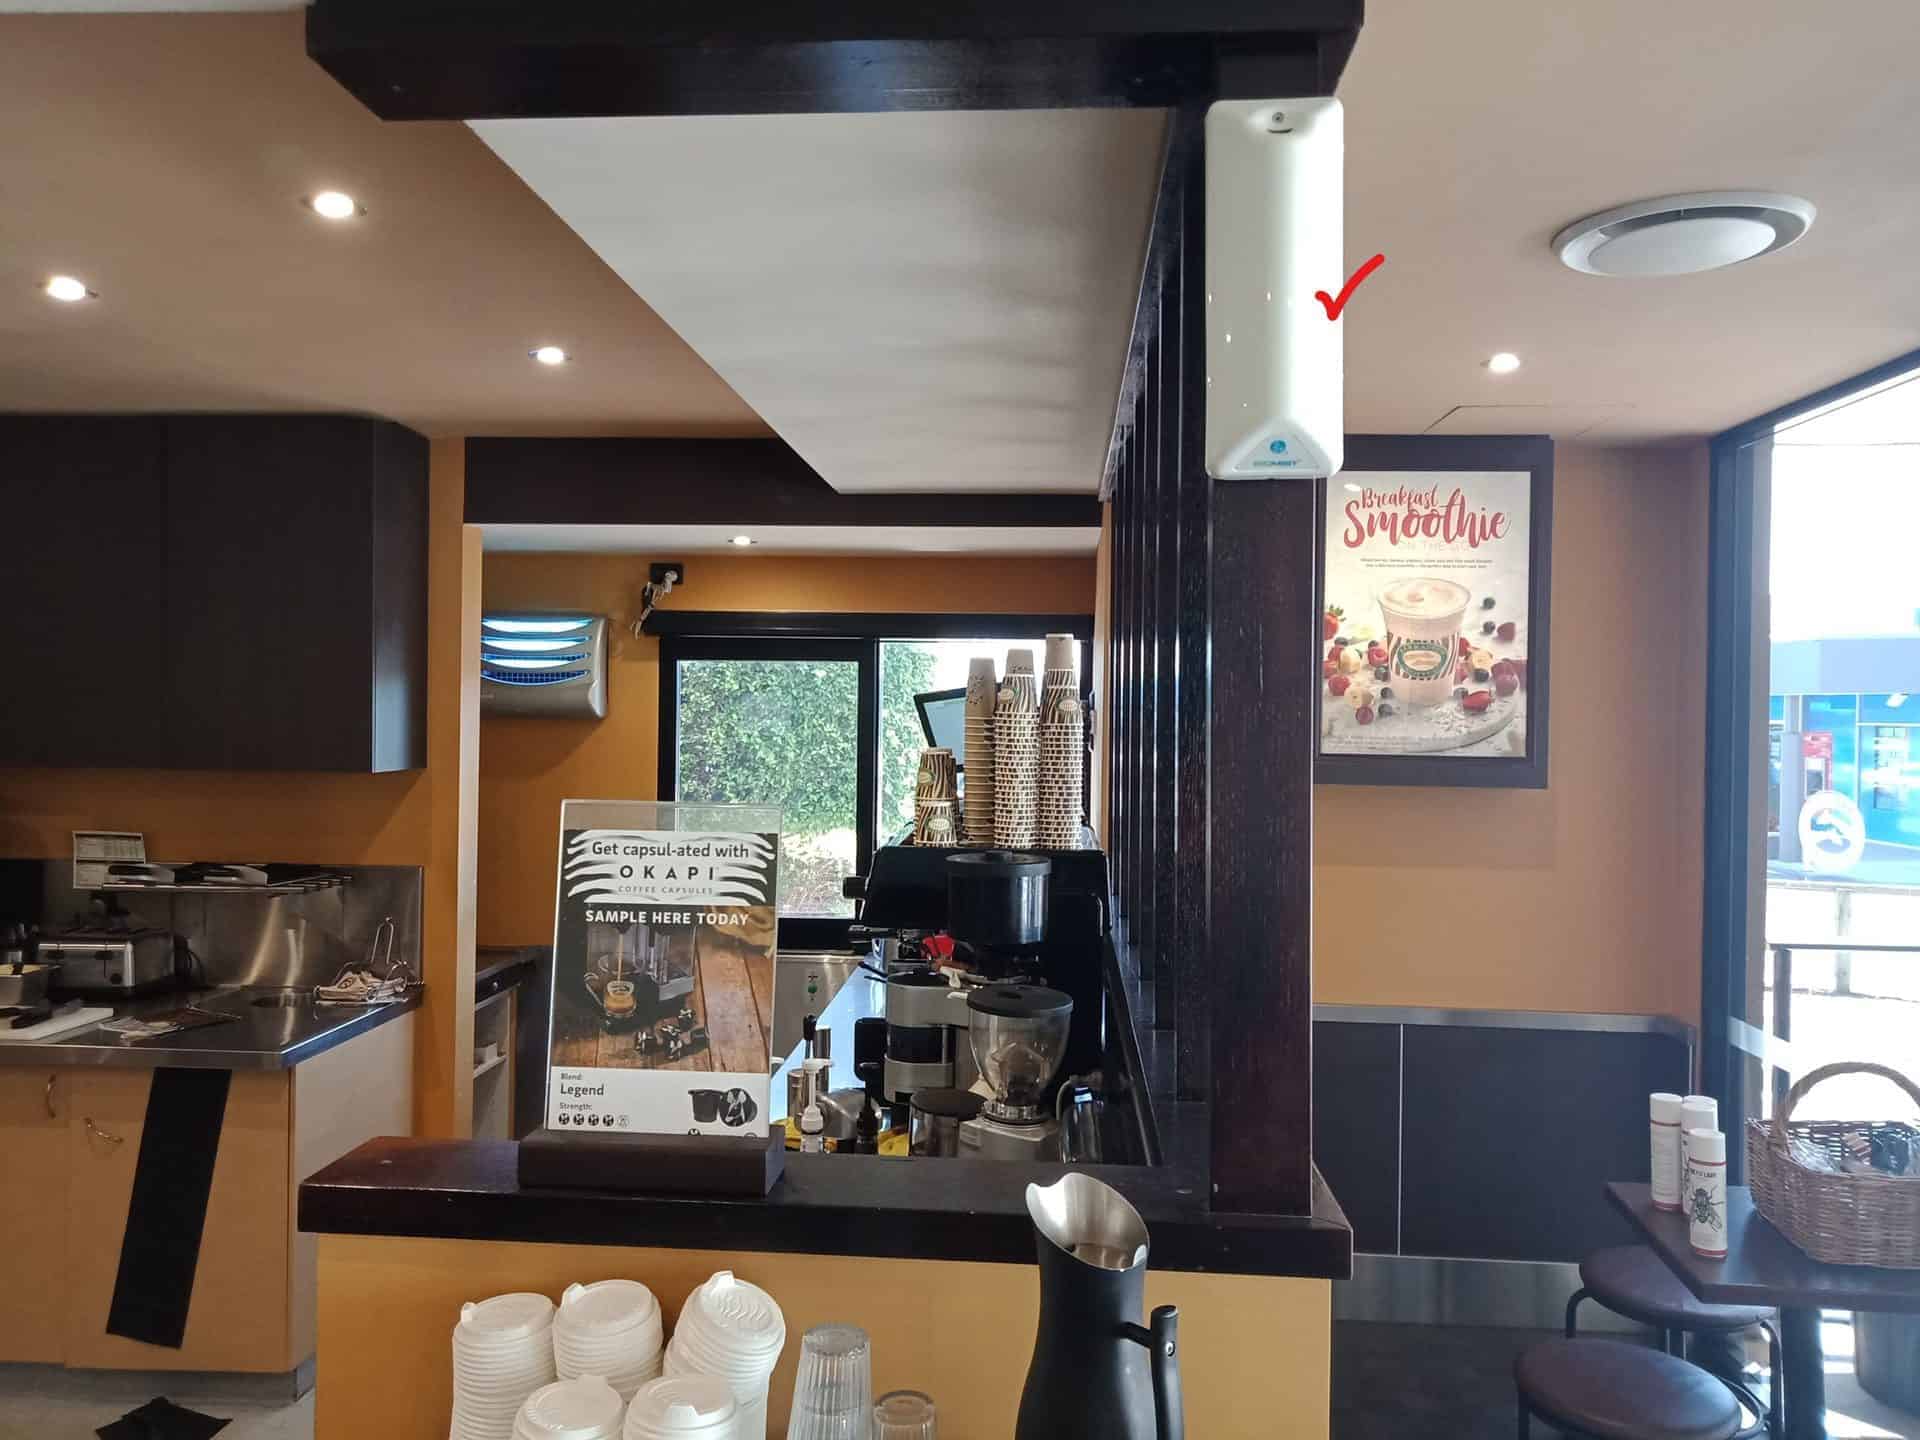 Automatic fly control dispenser mounted on an upright beside a coffee service area